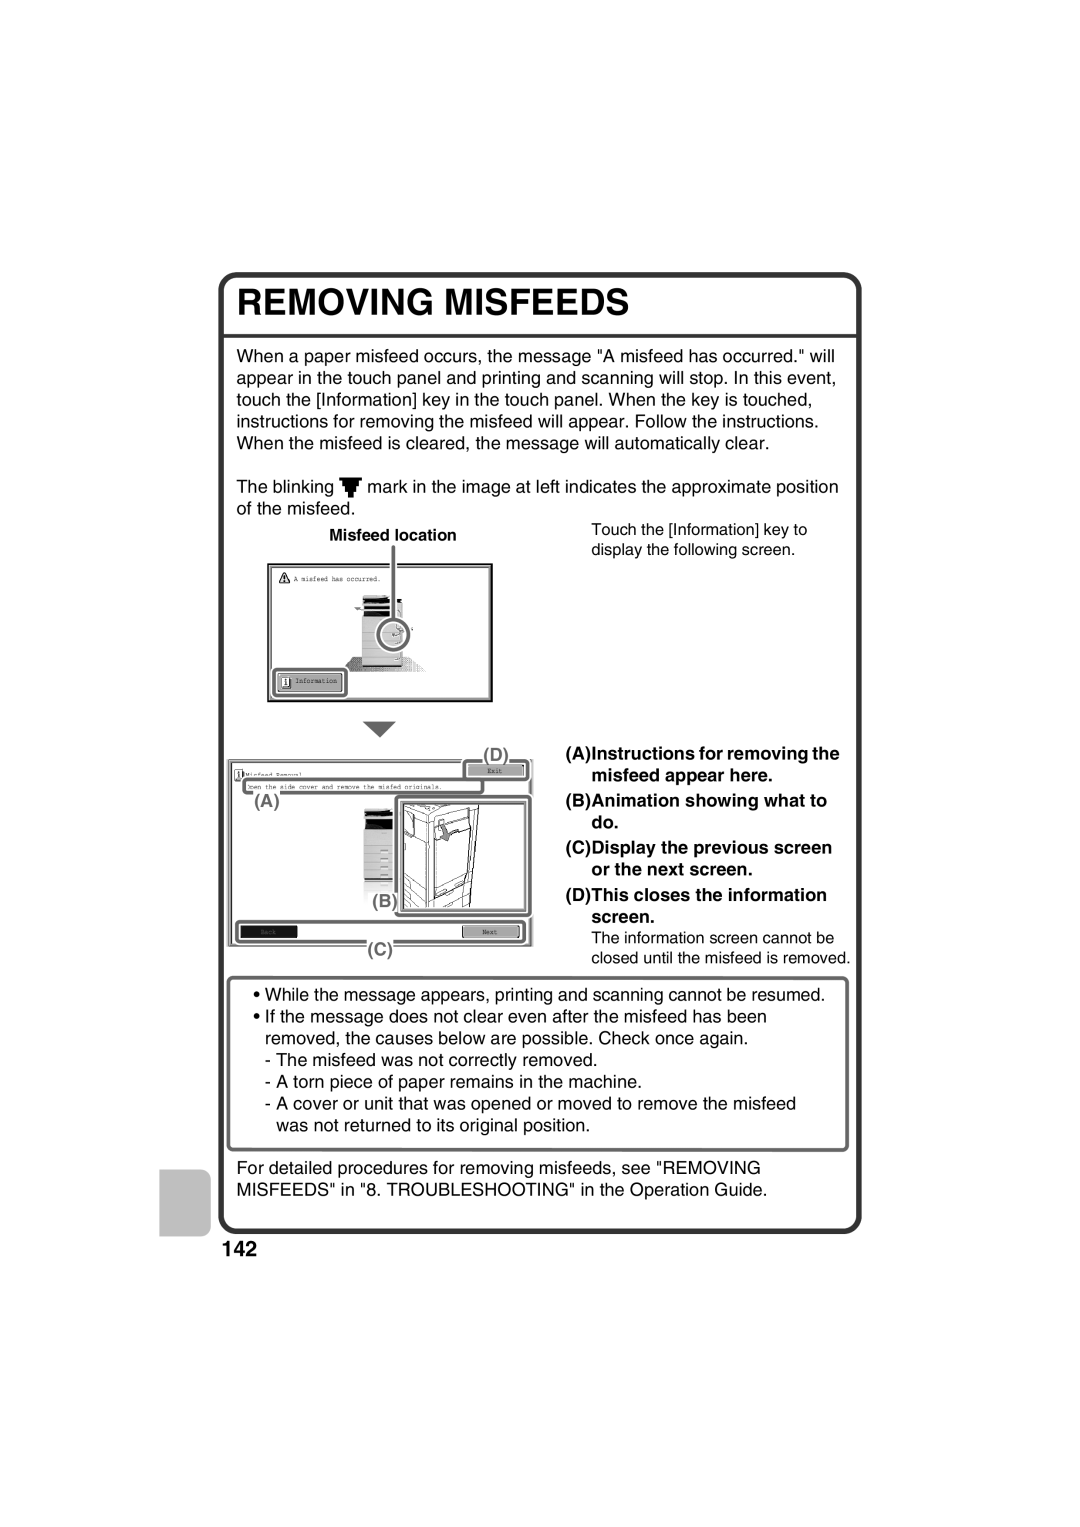 Sharp MX-C311 Removing Misfeeds, AInstructions for removing the, misfeed appear here, BAnimation showing what to do 